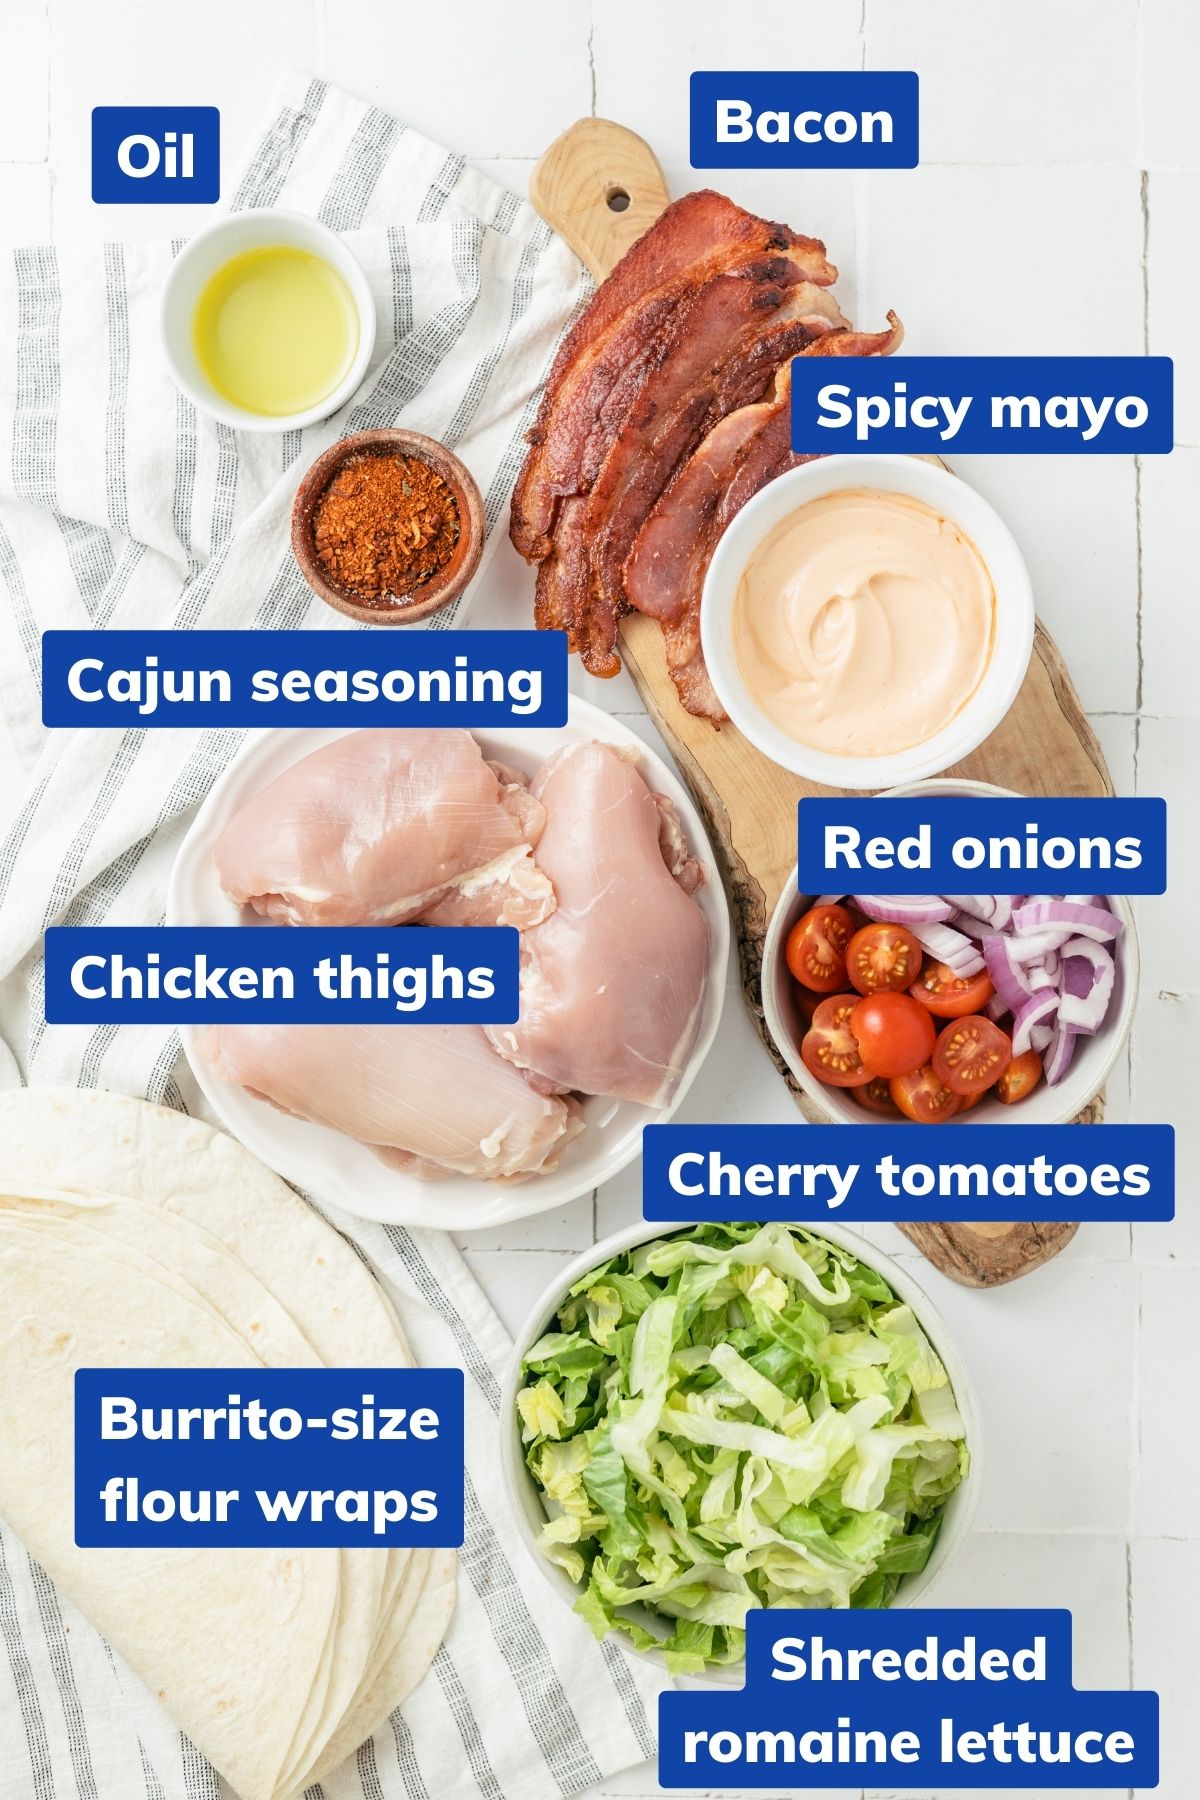 Ingredients for a delicious meal: Chicken thighs, Cajun seasoning, oil, spicy mayo, burrito-size flour wraps, shredded romaine lettuce, halved cherry tomatoes, thinly sliced red onions, and crispy bacon – all in separate bowls or containers